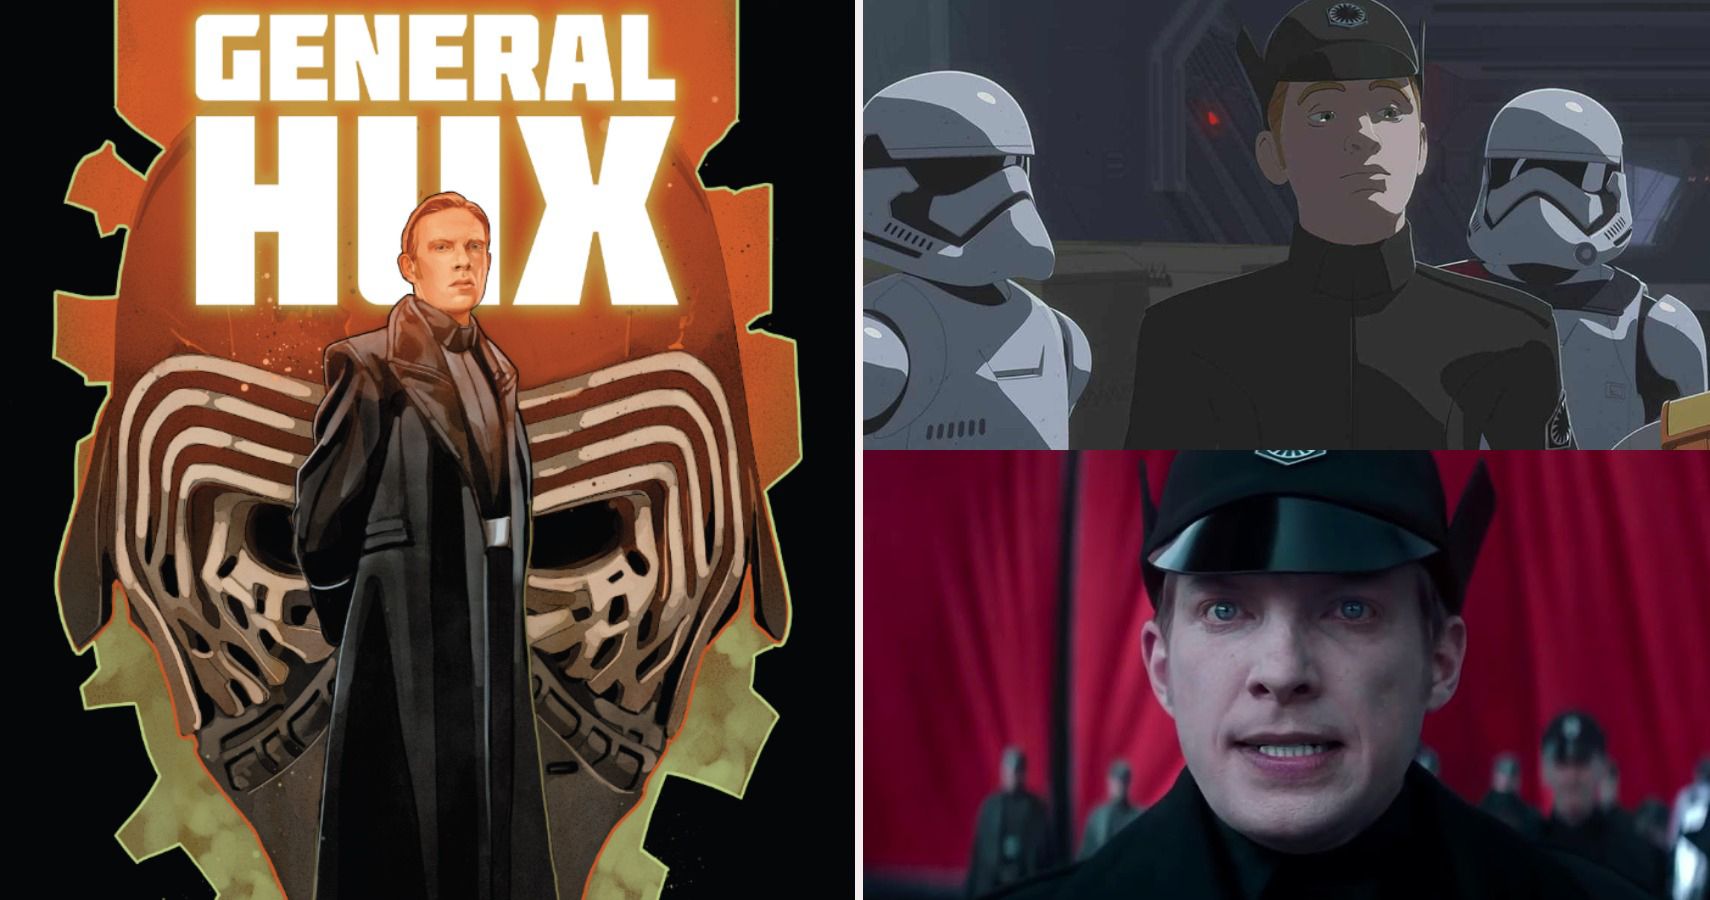 Star Wars 10 Details About General Hux You Won’t Know If You Only Watched The Movies